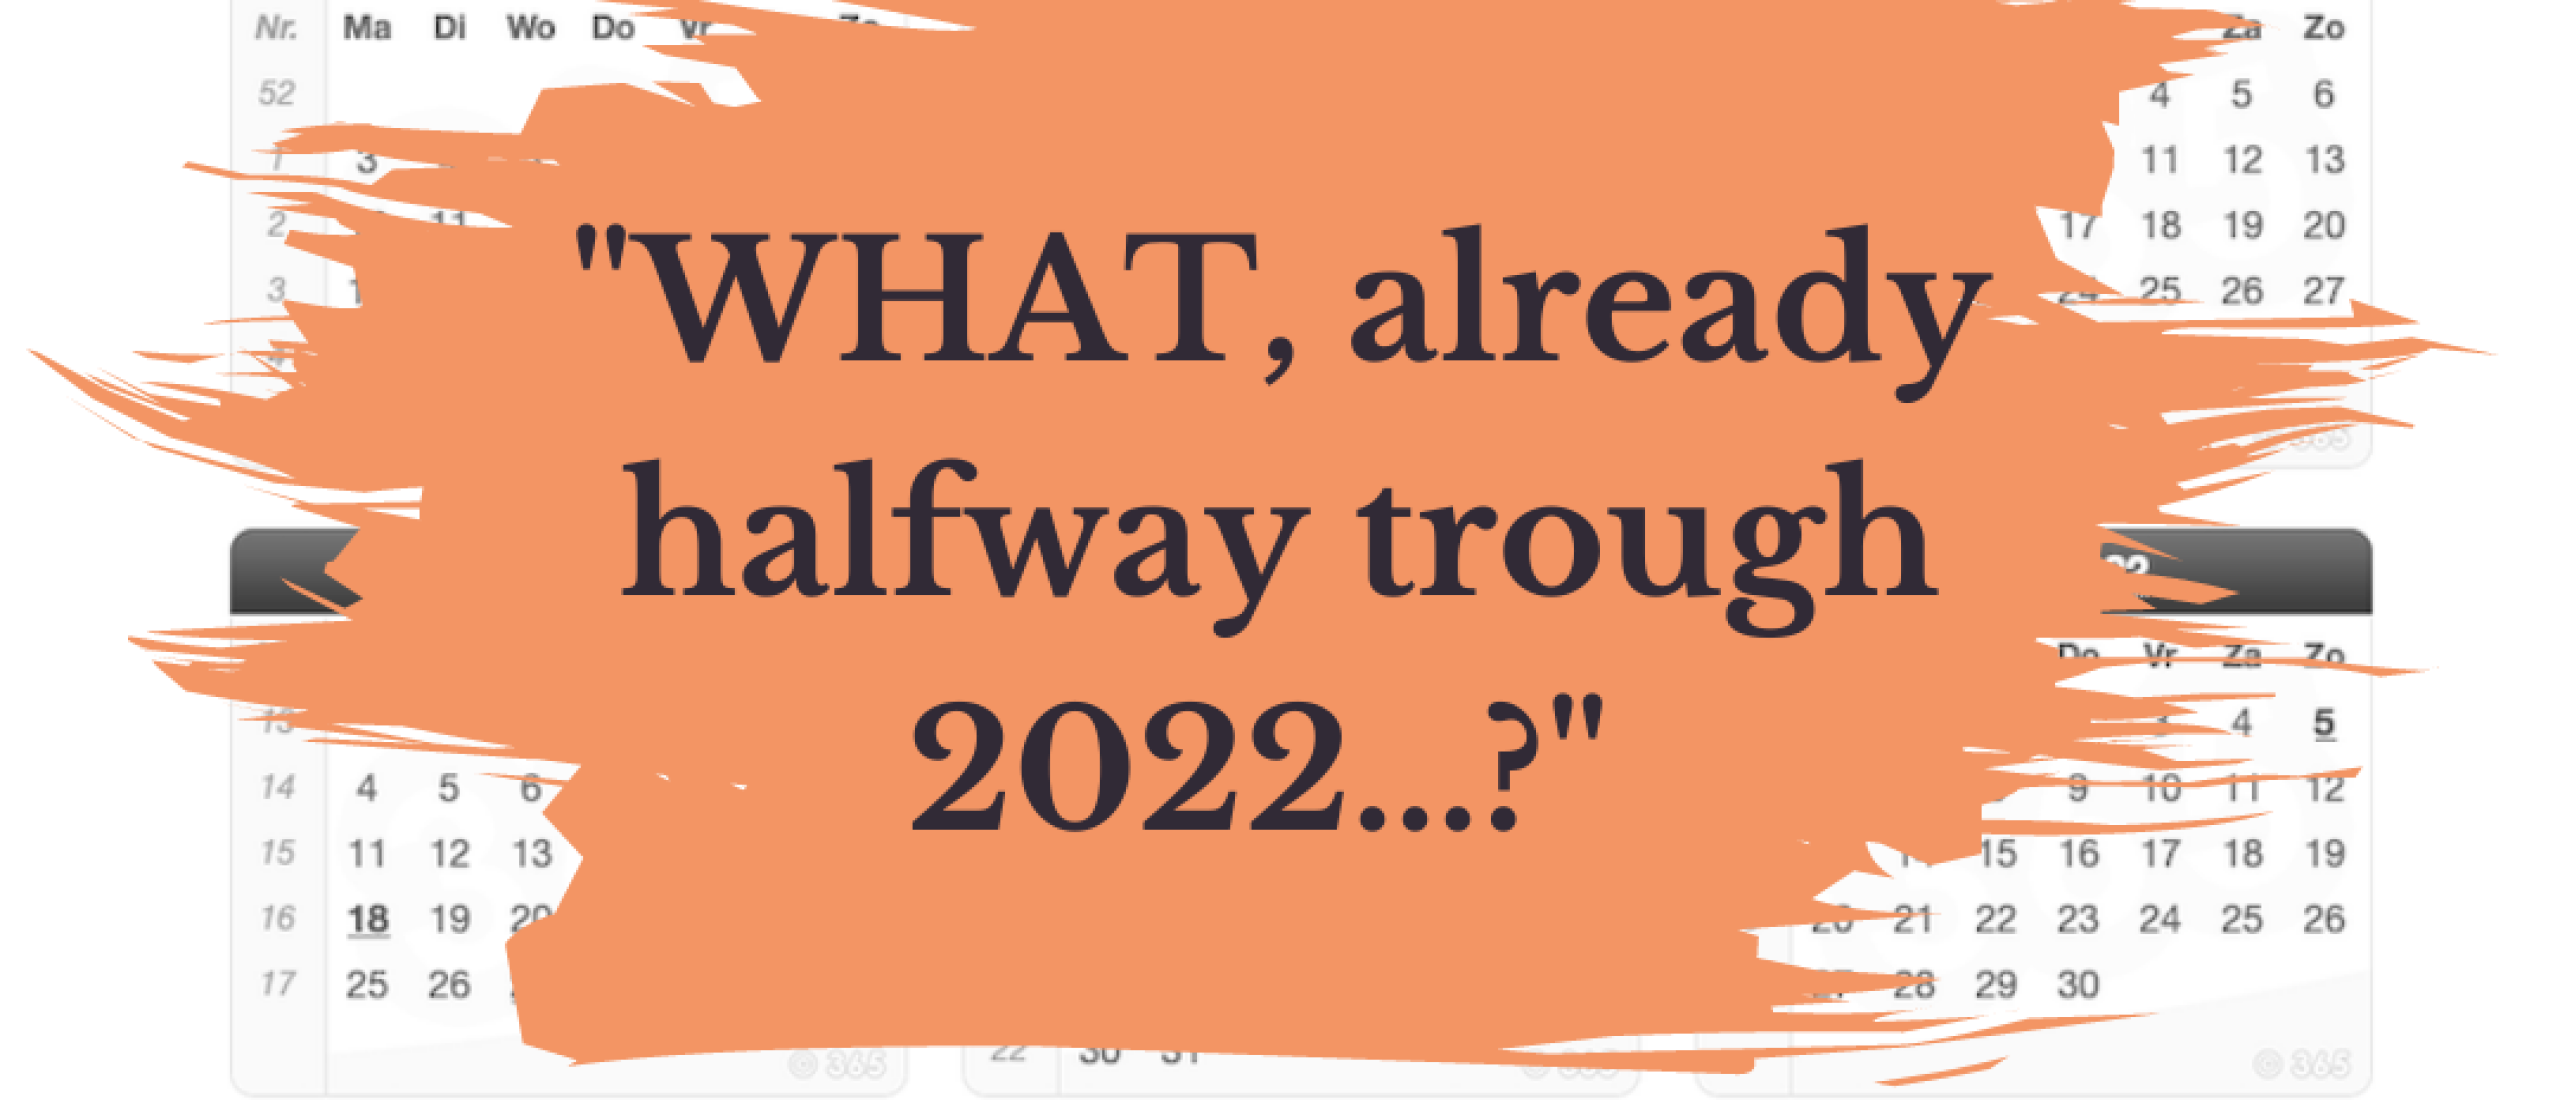 WHAT, halfway through 2022 already? I need to do things differently..!